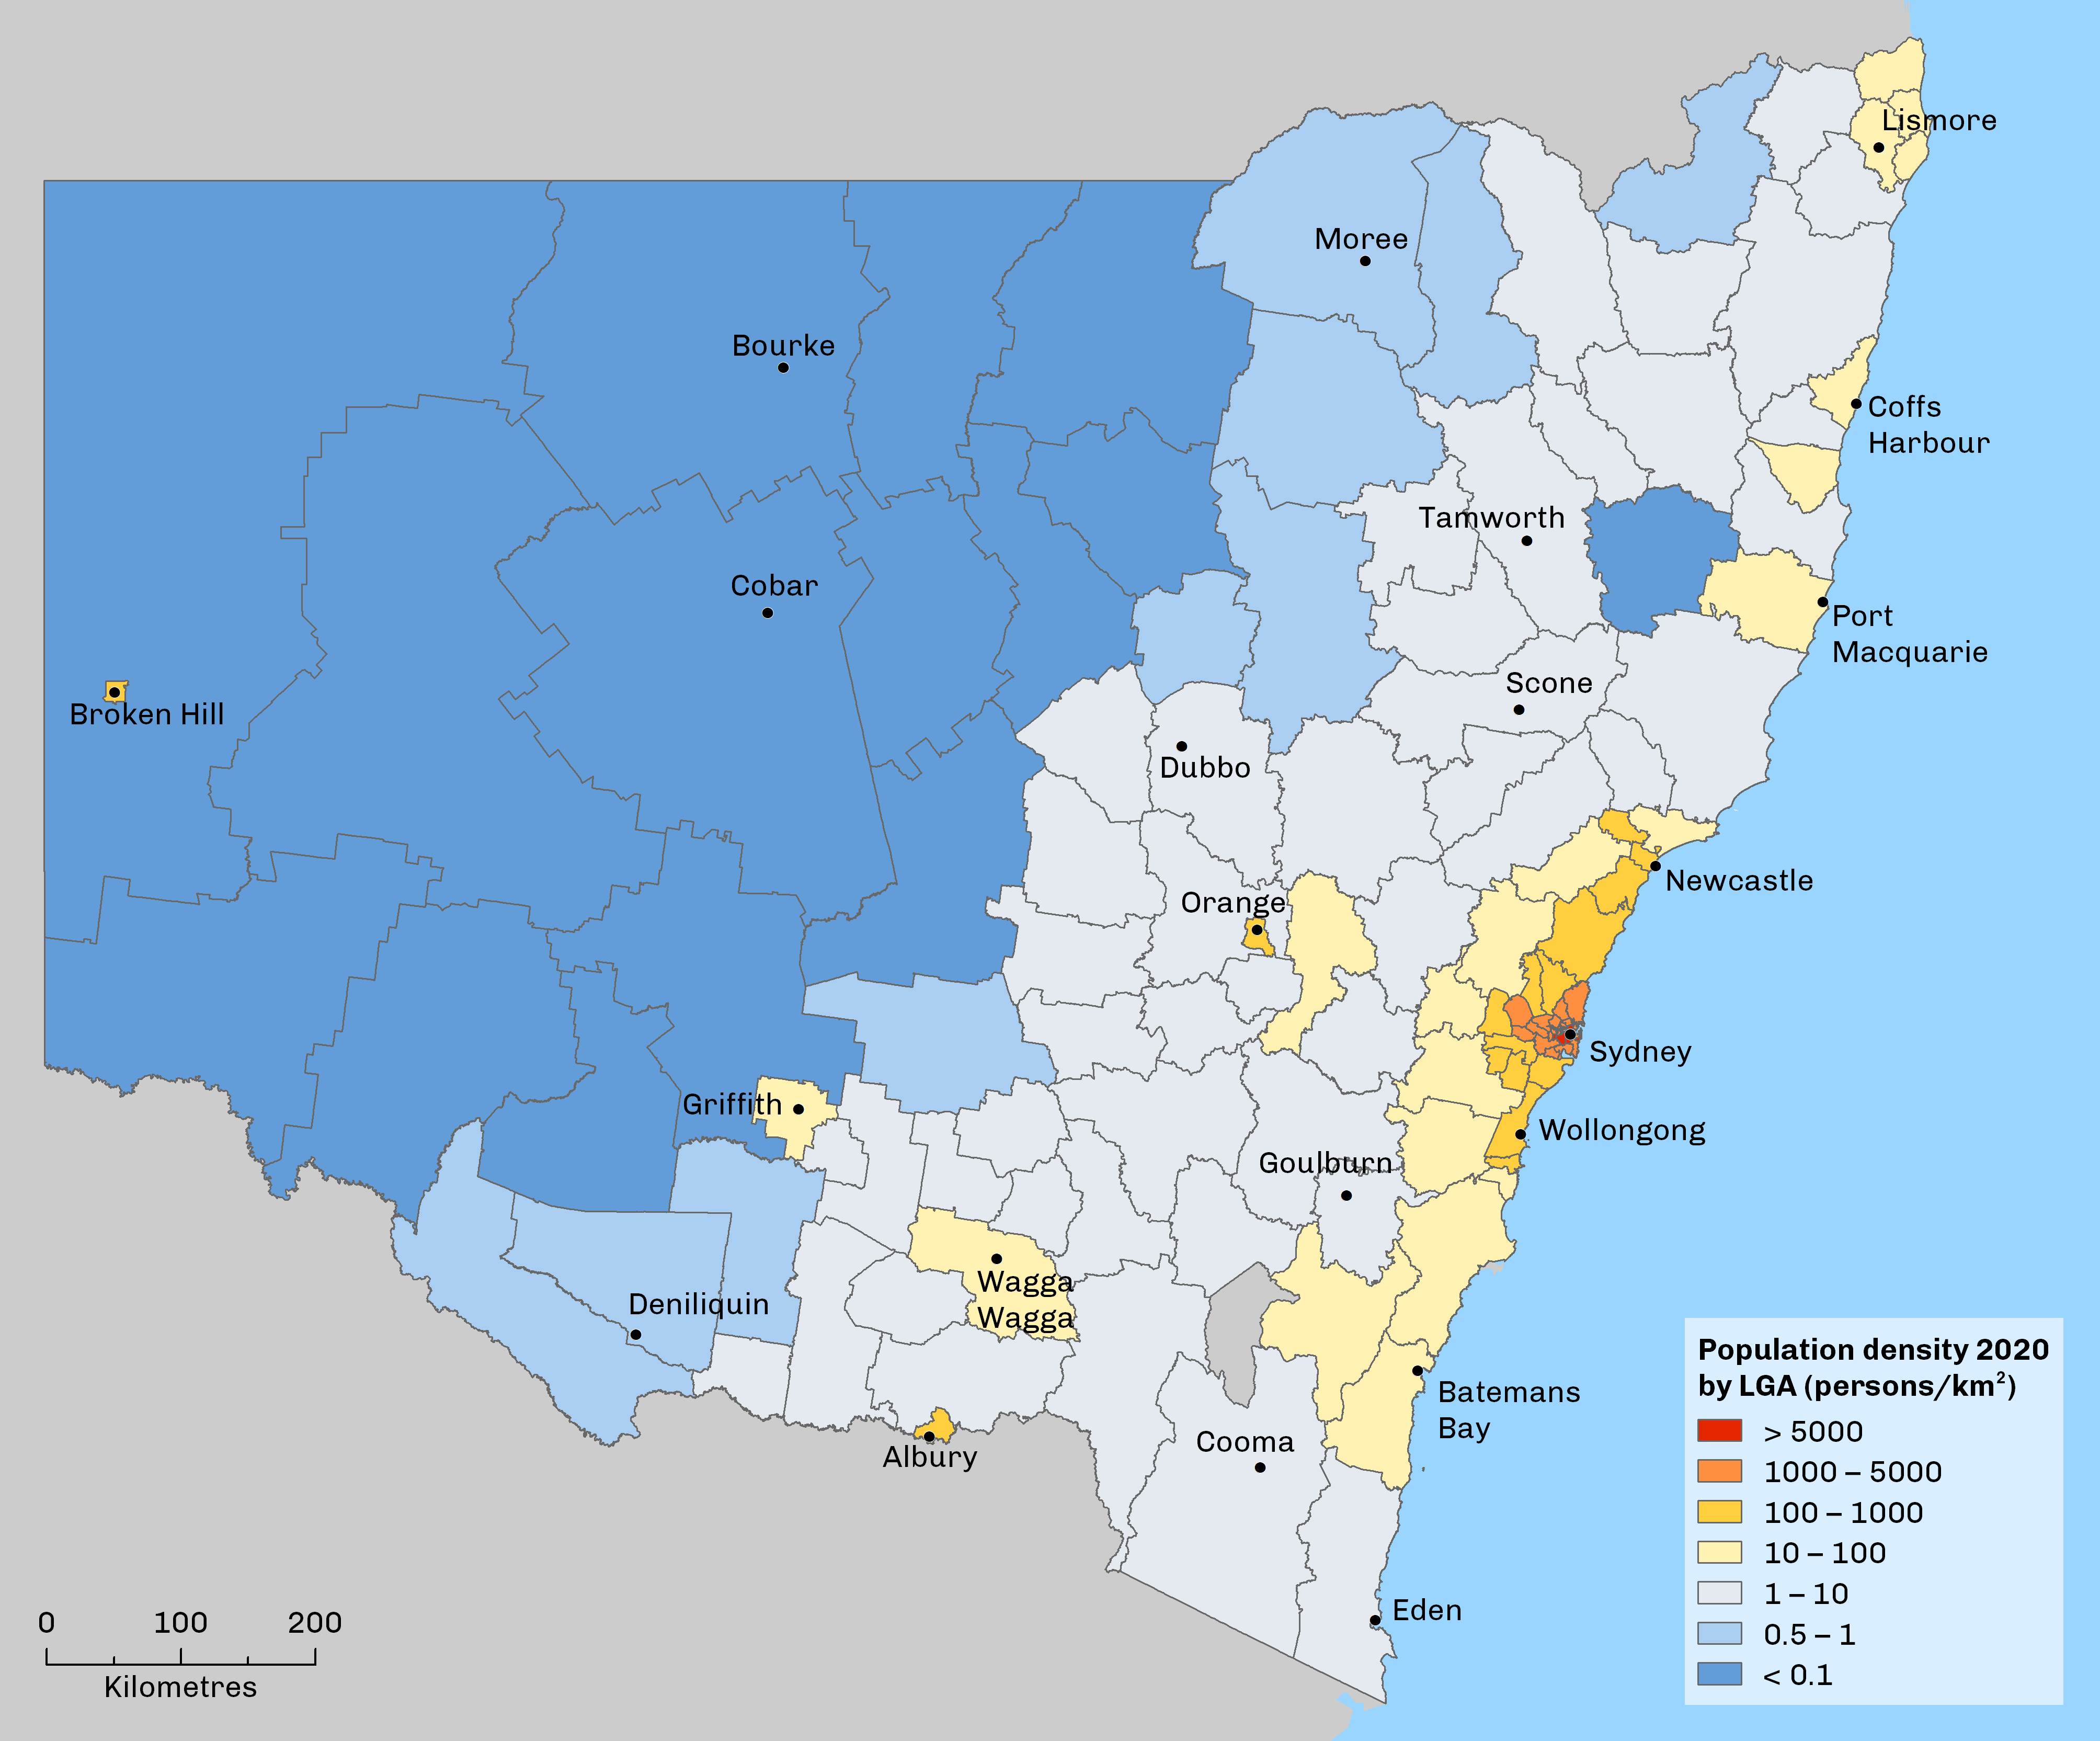 Map showing population density with lowest density in the north, south and central west of NSW and greatest density in Sydney and surrounds.